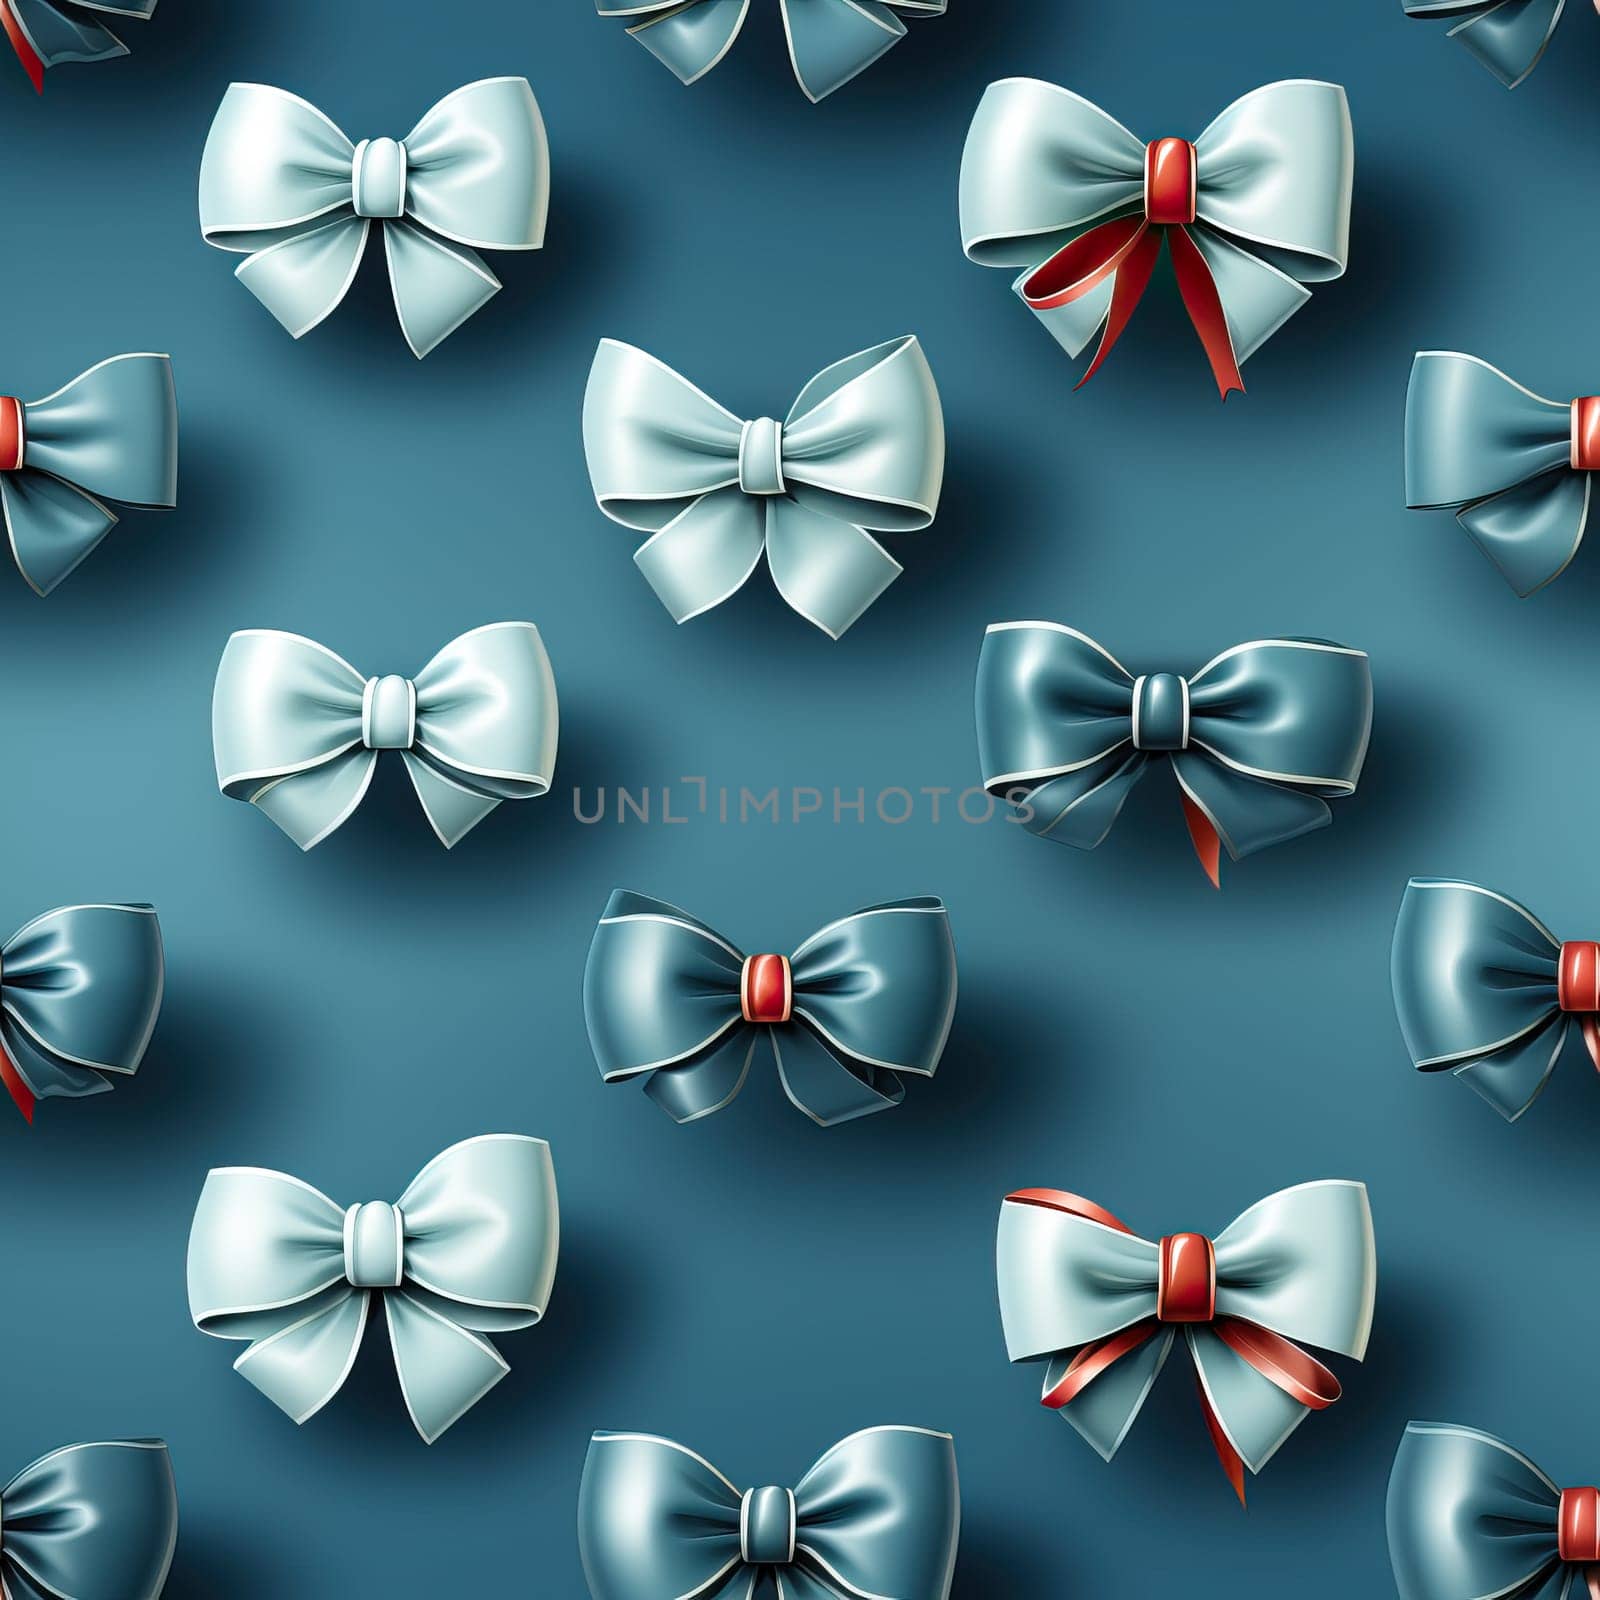 Several silver and red bows arranged on a blue surface by Fischeron